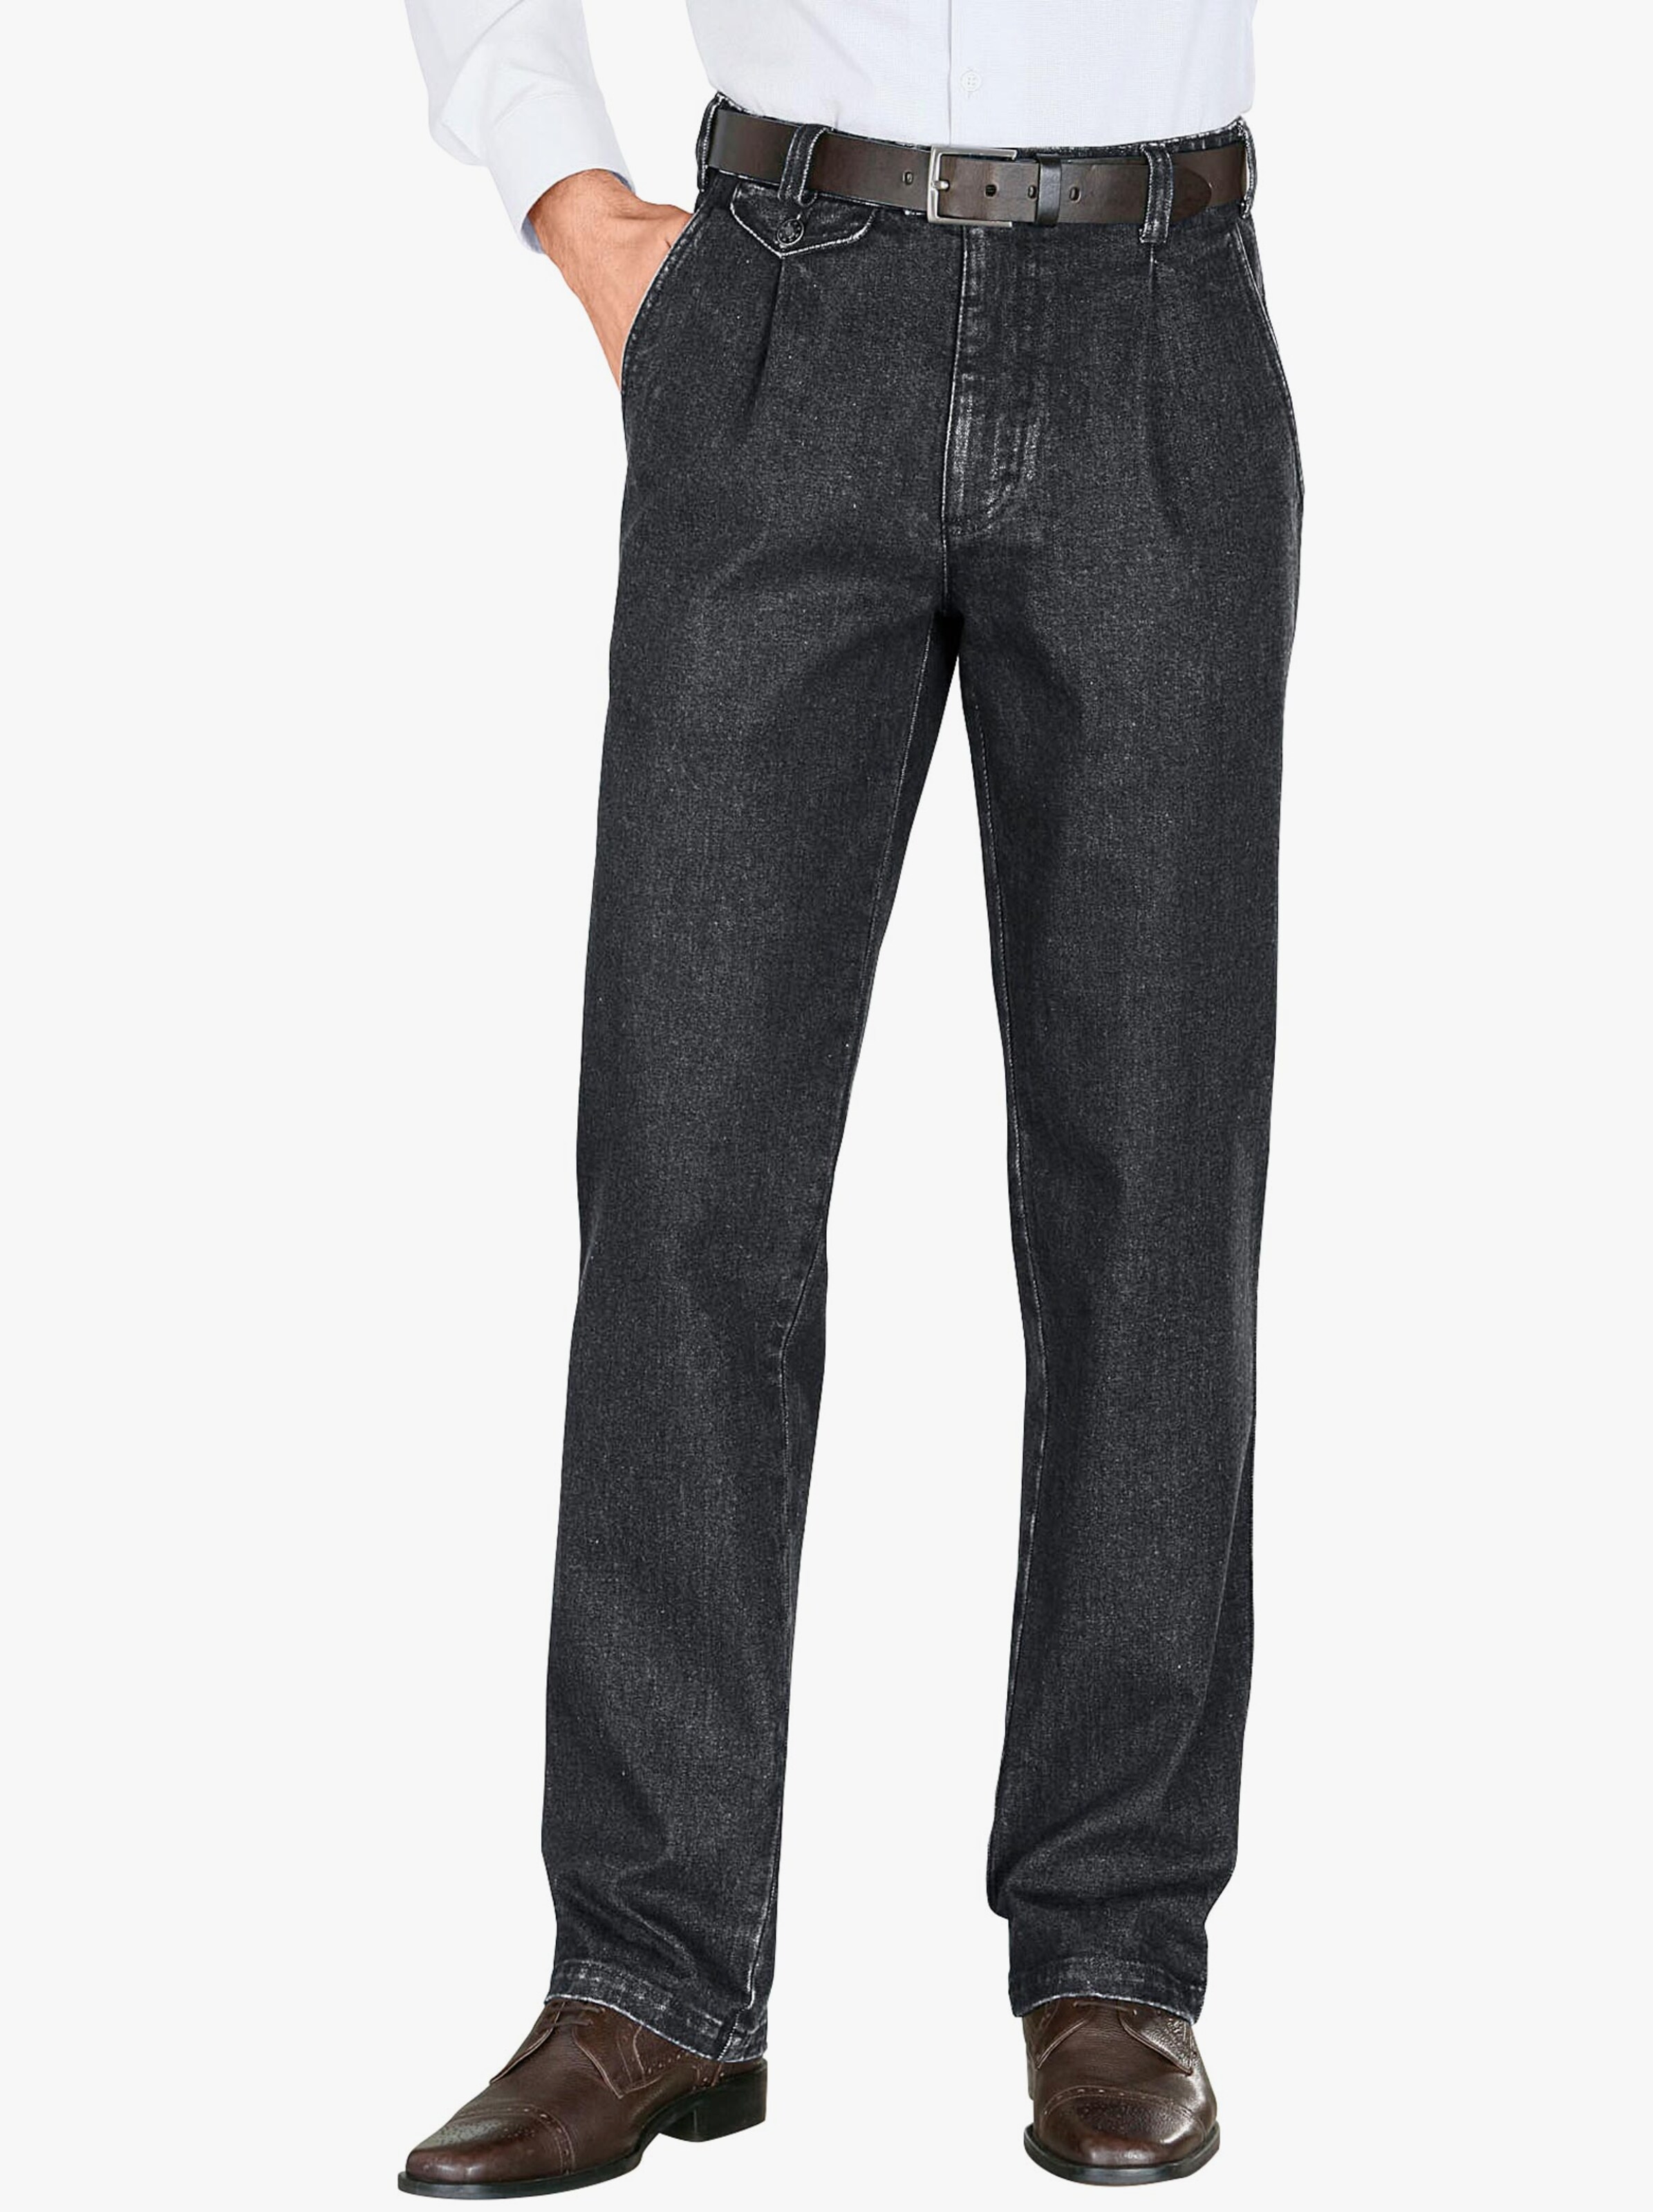 Jeans in black denim | Your Look... for less!